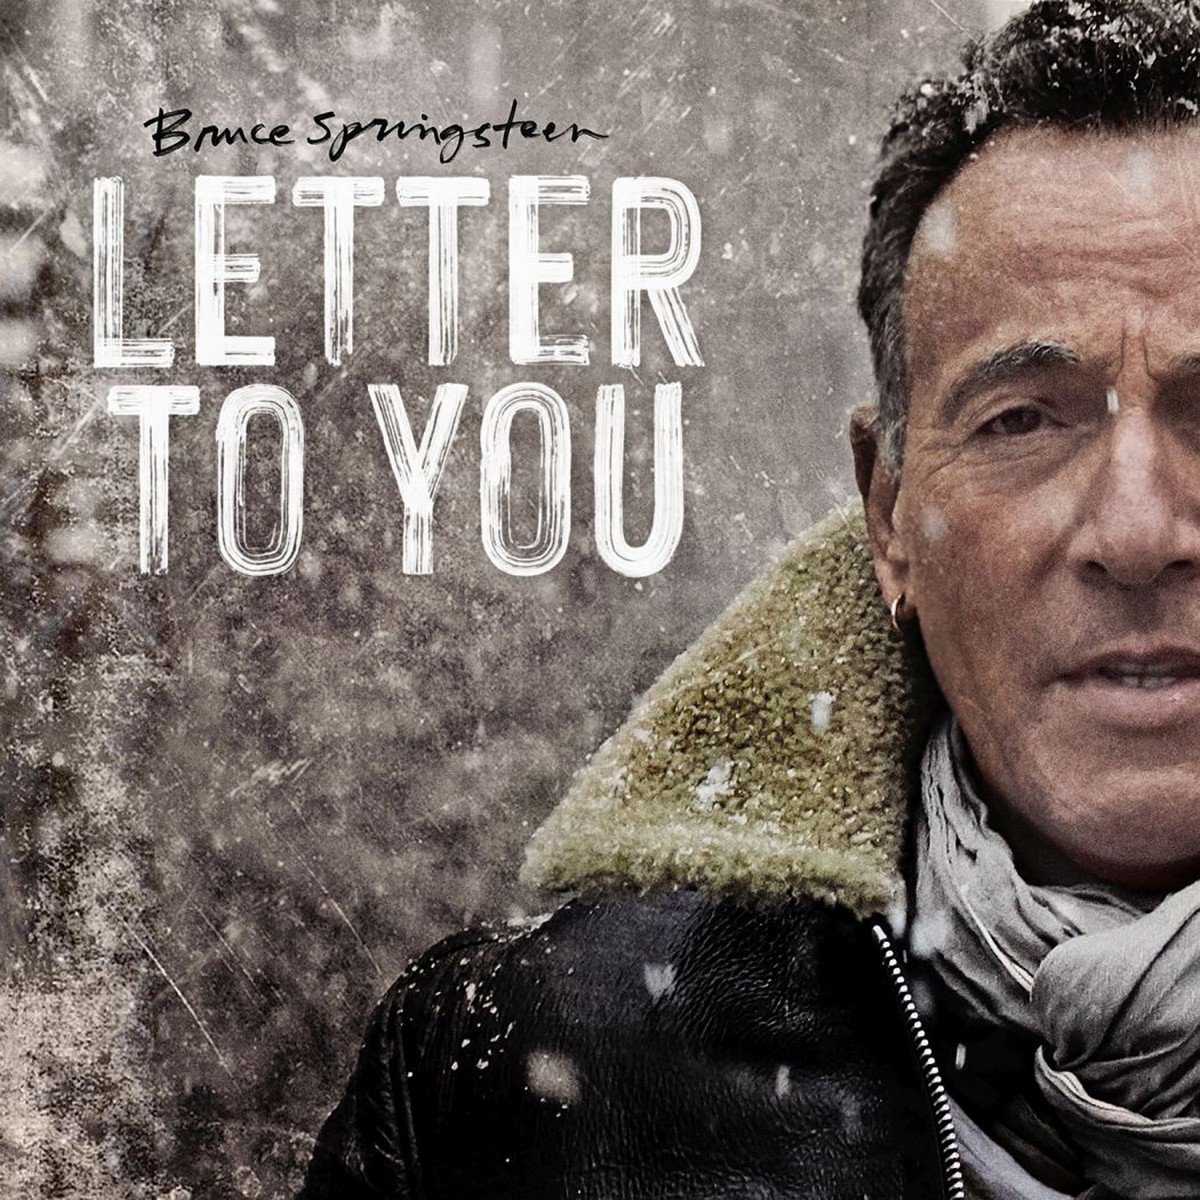 Letter to you - Bruce Springsteen